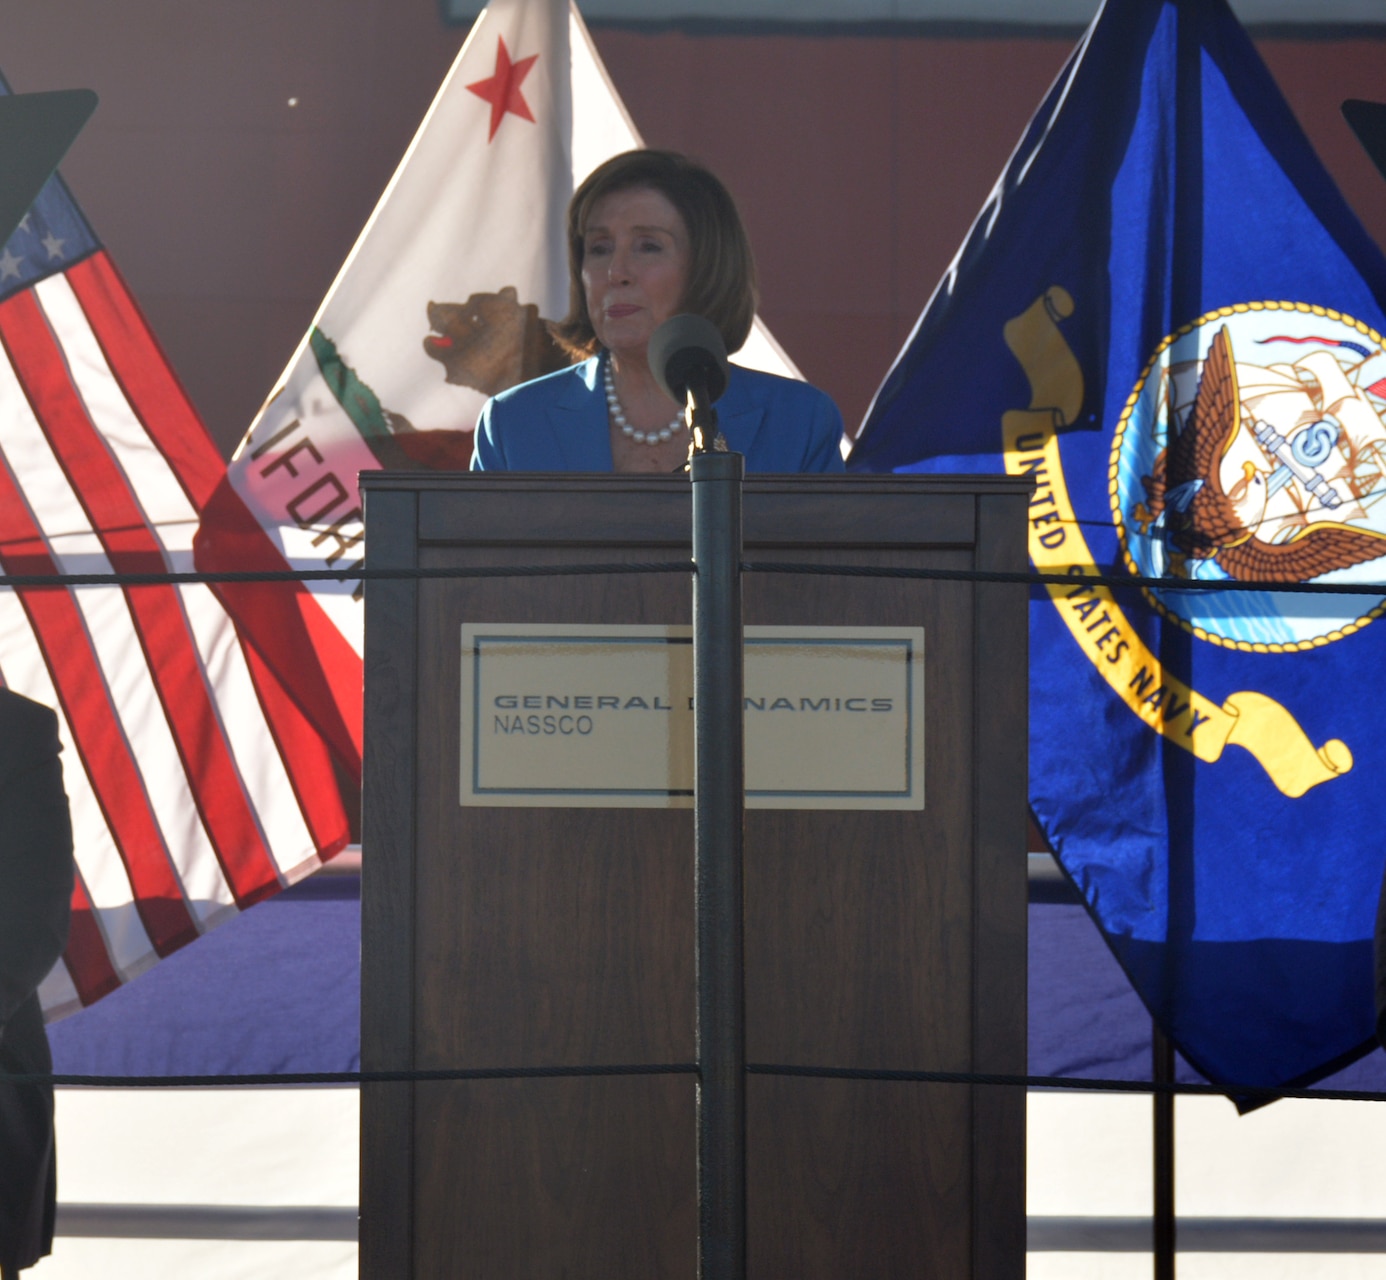 Nancy Pelosi, Speaker of the House Emerita, U.S. House of Representatives, addresses the audience during the christening ceremony of MSC's newest ship, USNS Robert F. Kennedy (T-AO 208) at the General Dynamics NASSCO shipyard in San Diego, Calif.